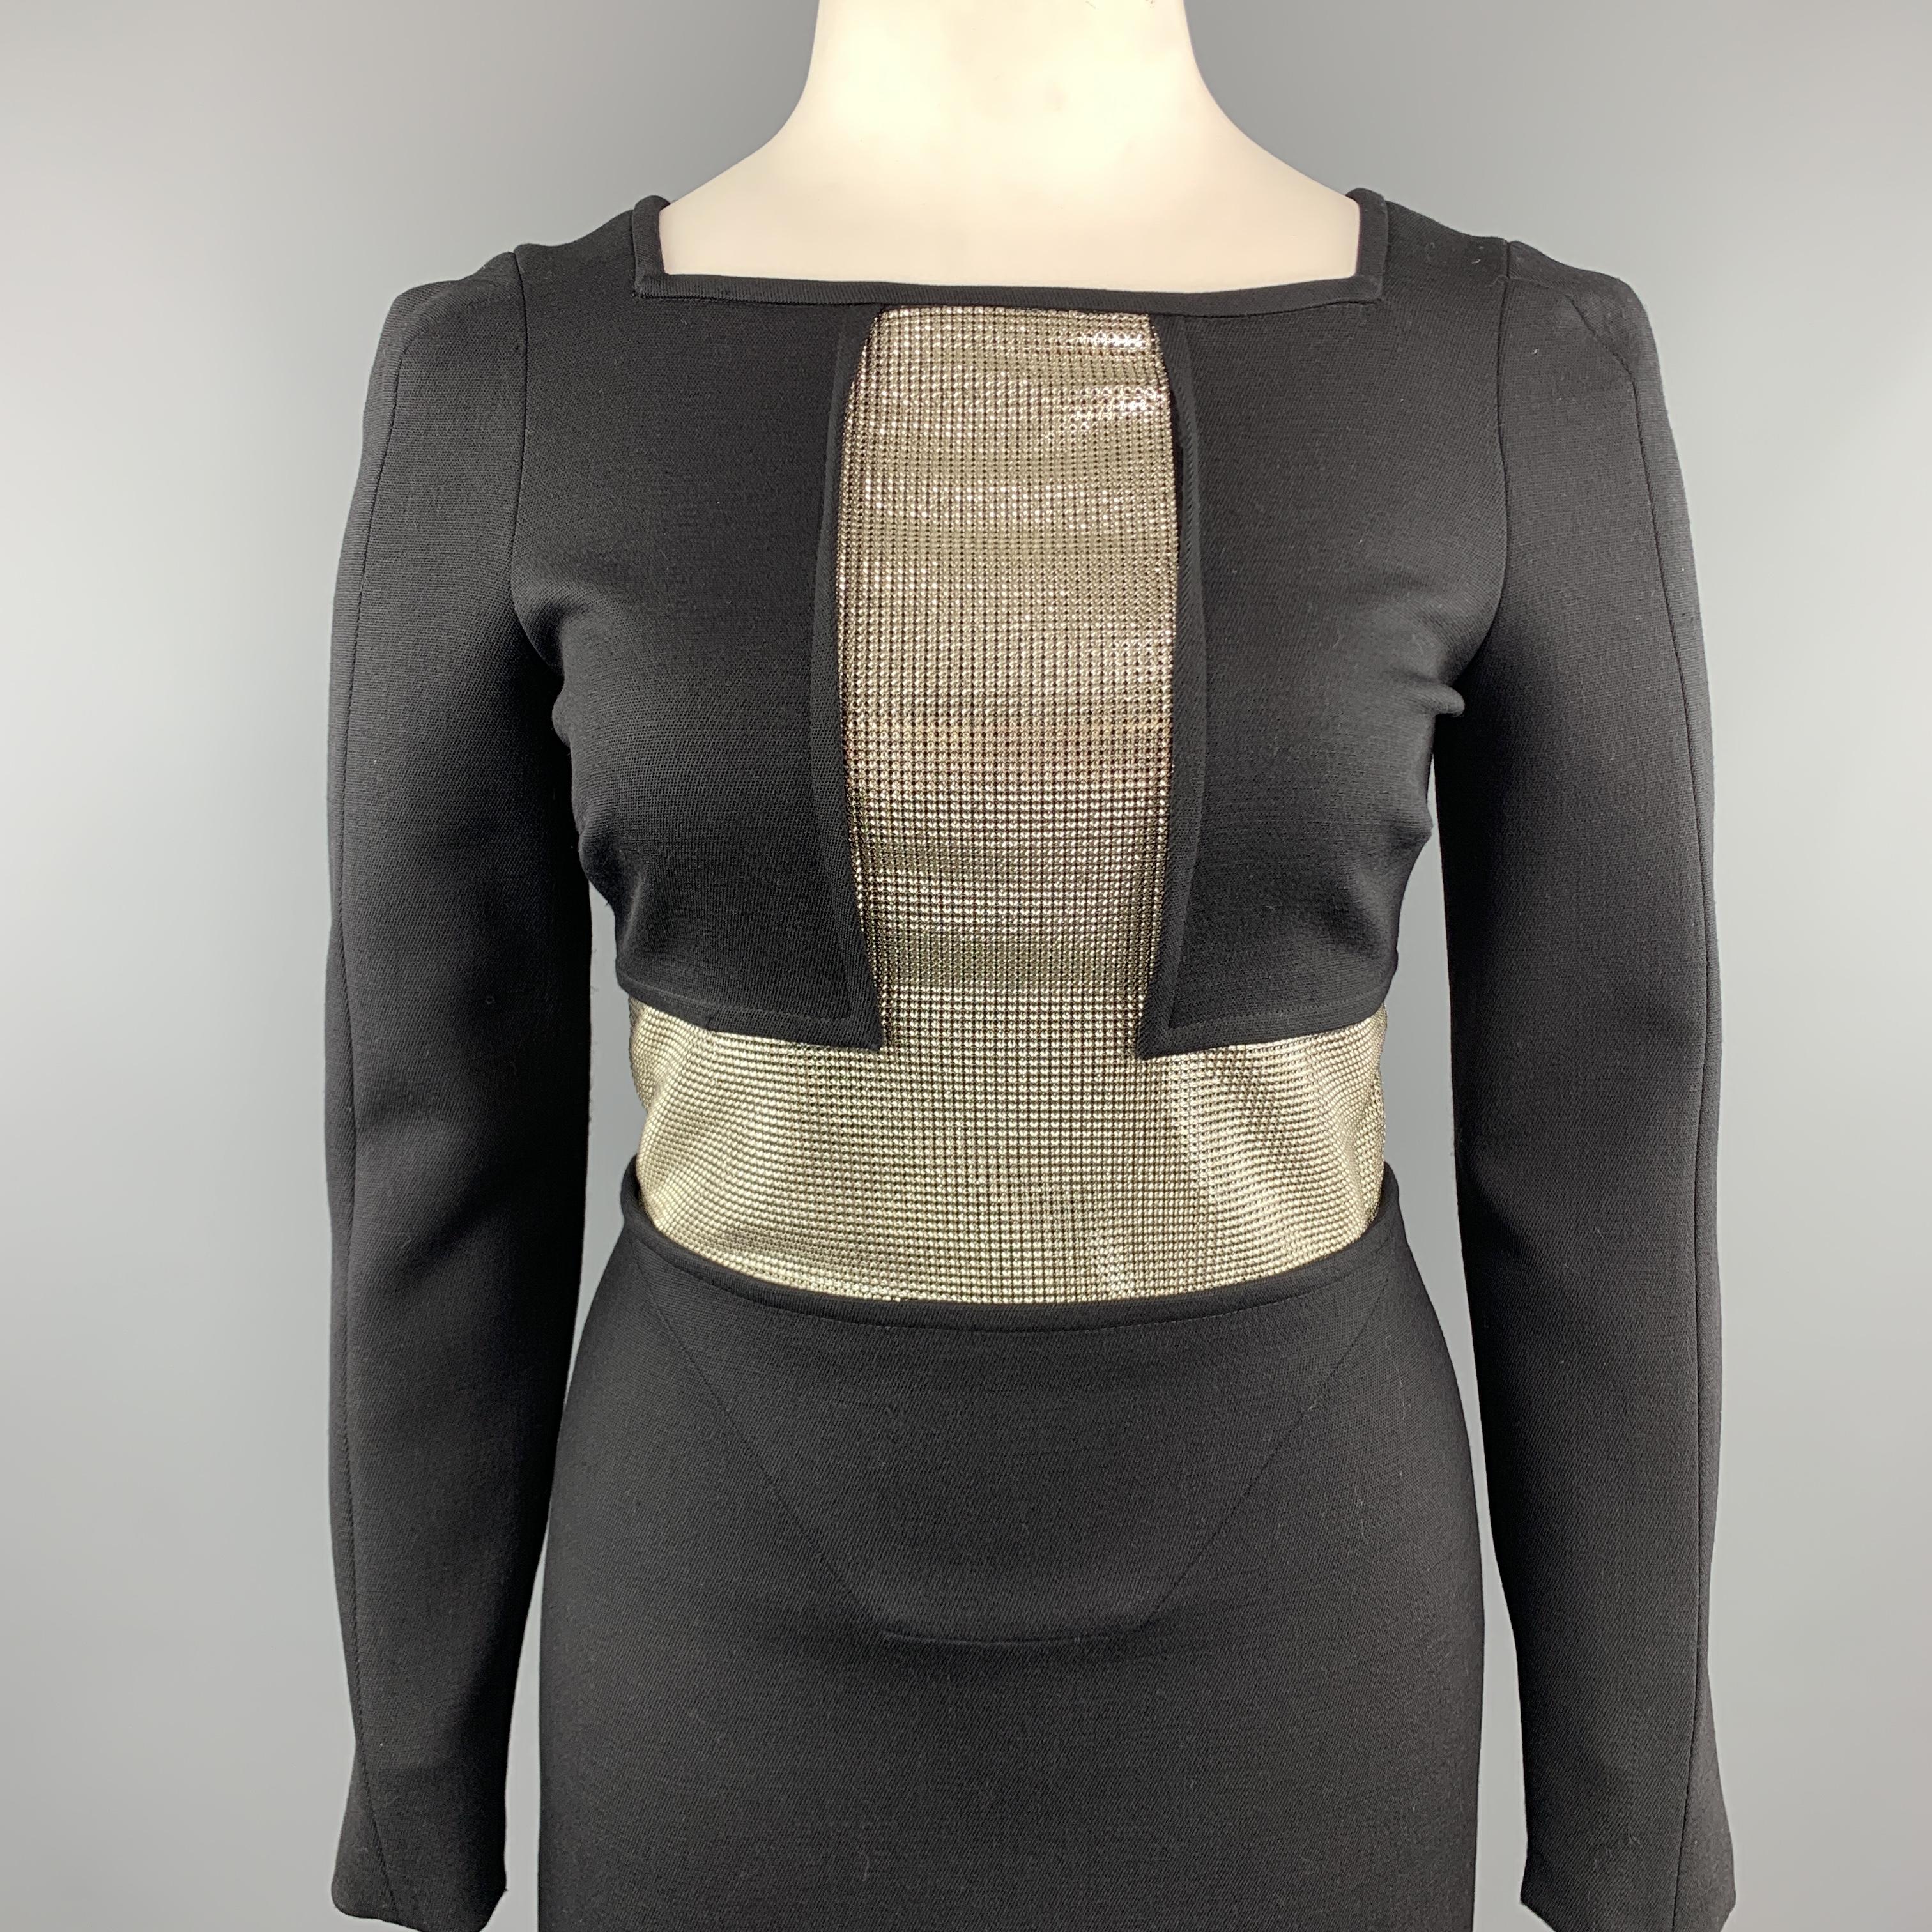 VERSACE cocktail dress comes in black woven wool blend fabric with a square boat neck, long sleeves, low back, and silver tone metal chain mail cross embellishment. Made in Italy.

Very Good Pre-Owned Condition.
Marked: IT